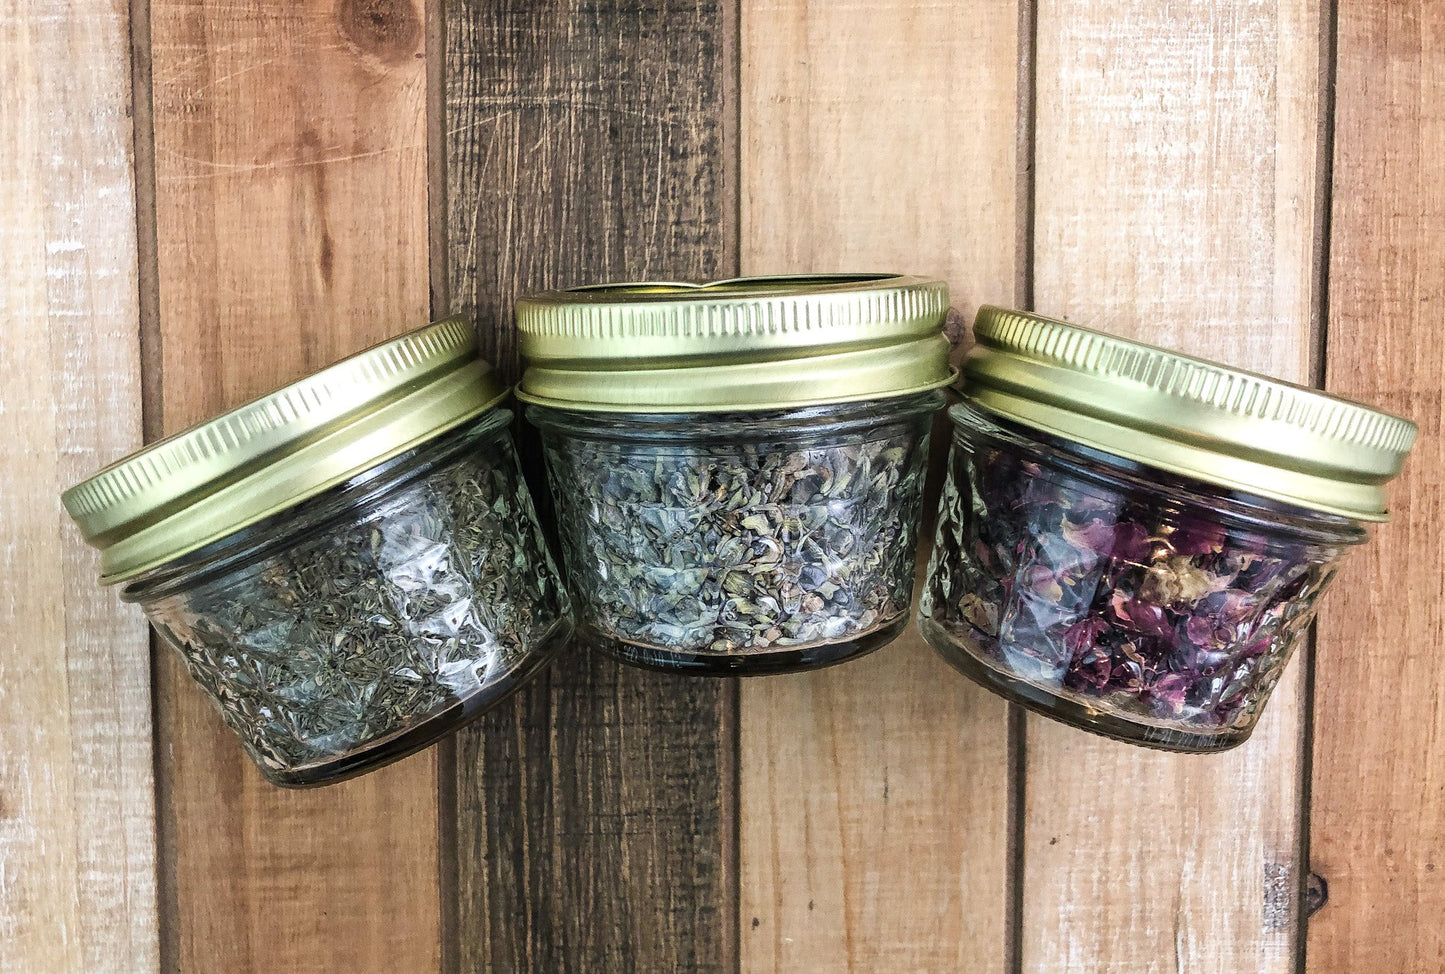 dried herbs in 3 mini glass jars on a wooden table top as background